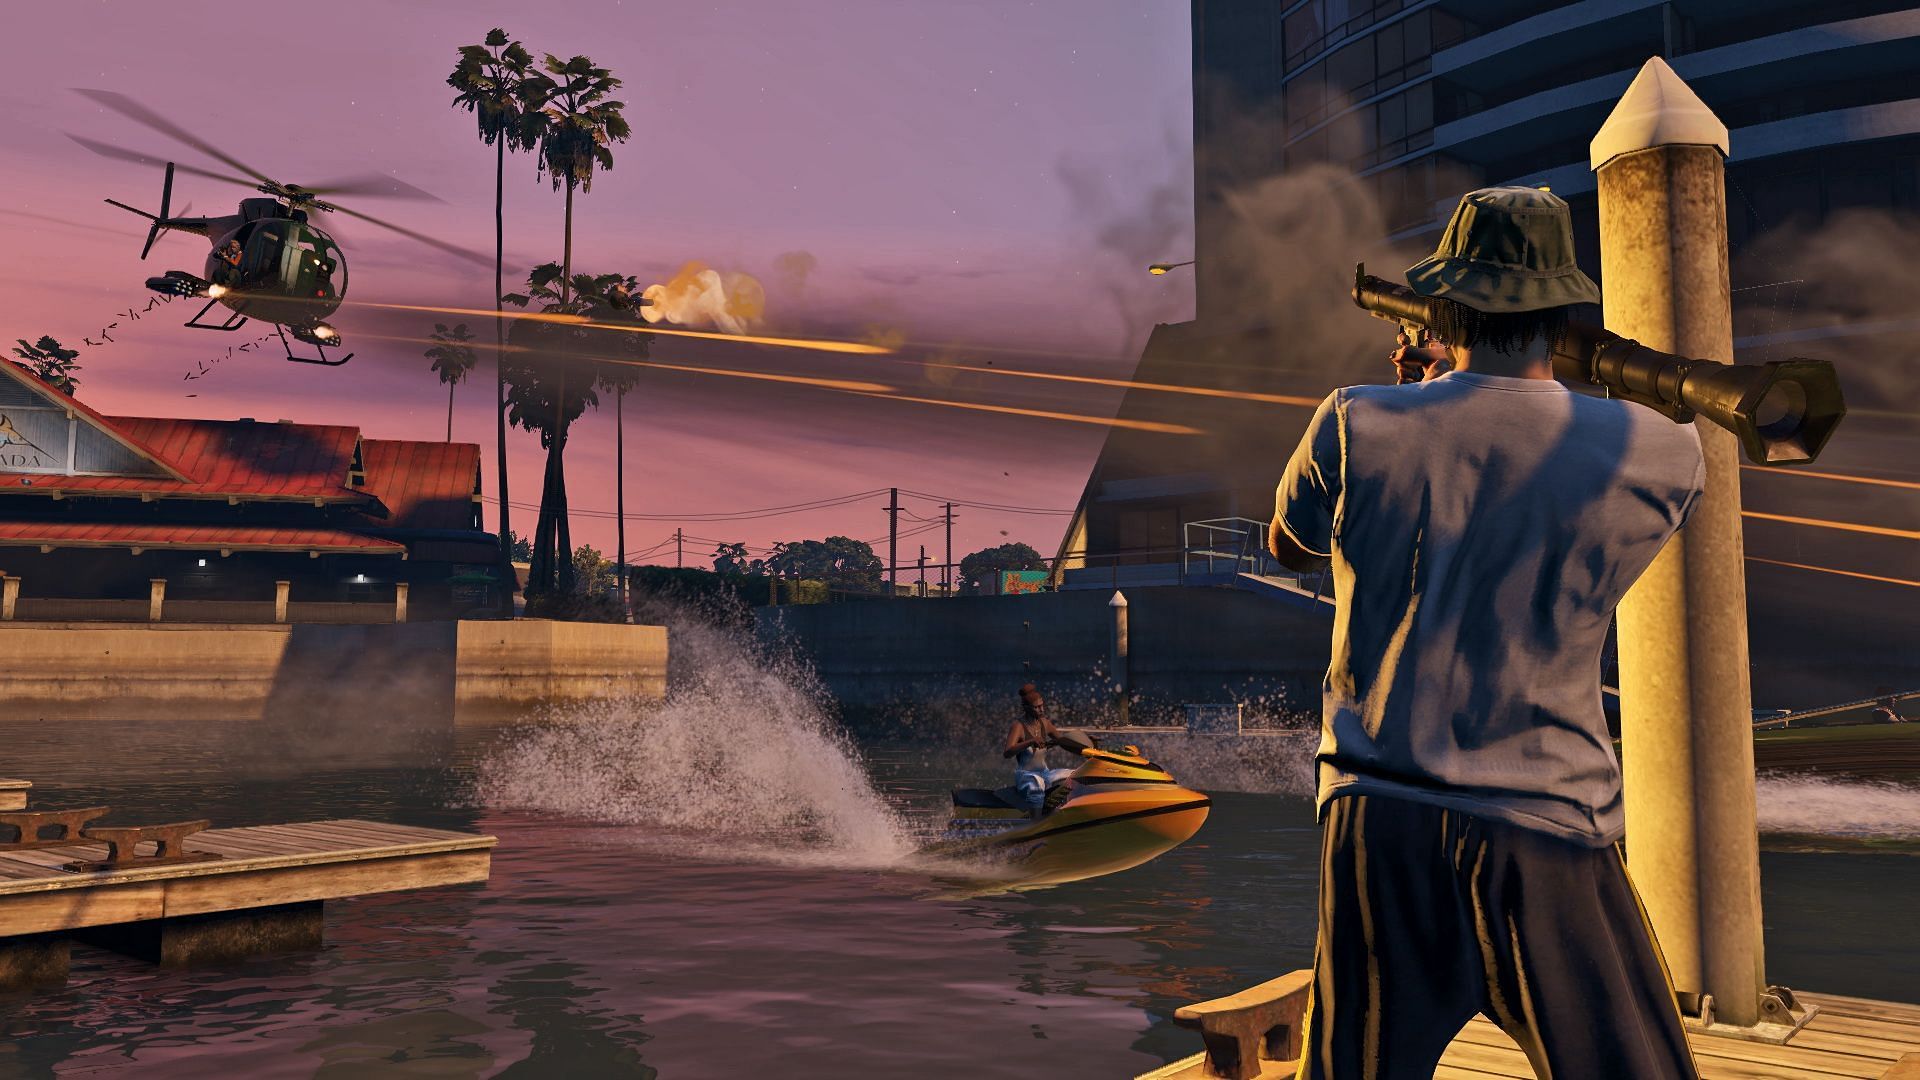 When GTA 6 Online comes out: Fans predict when Rockstar will drop support  for GTA Online on PS4 and Xbox One